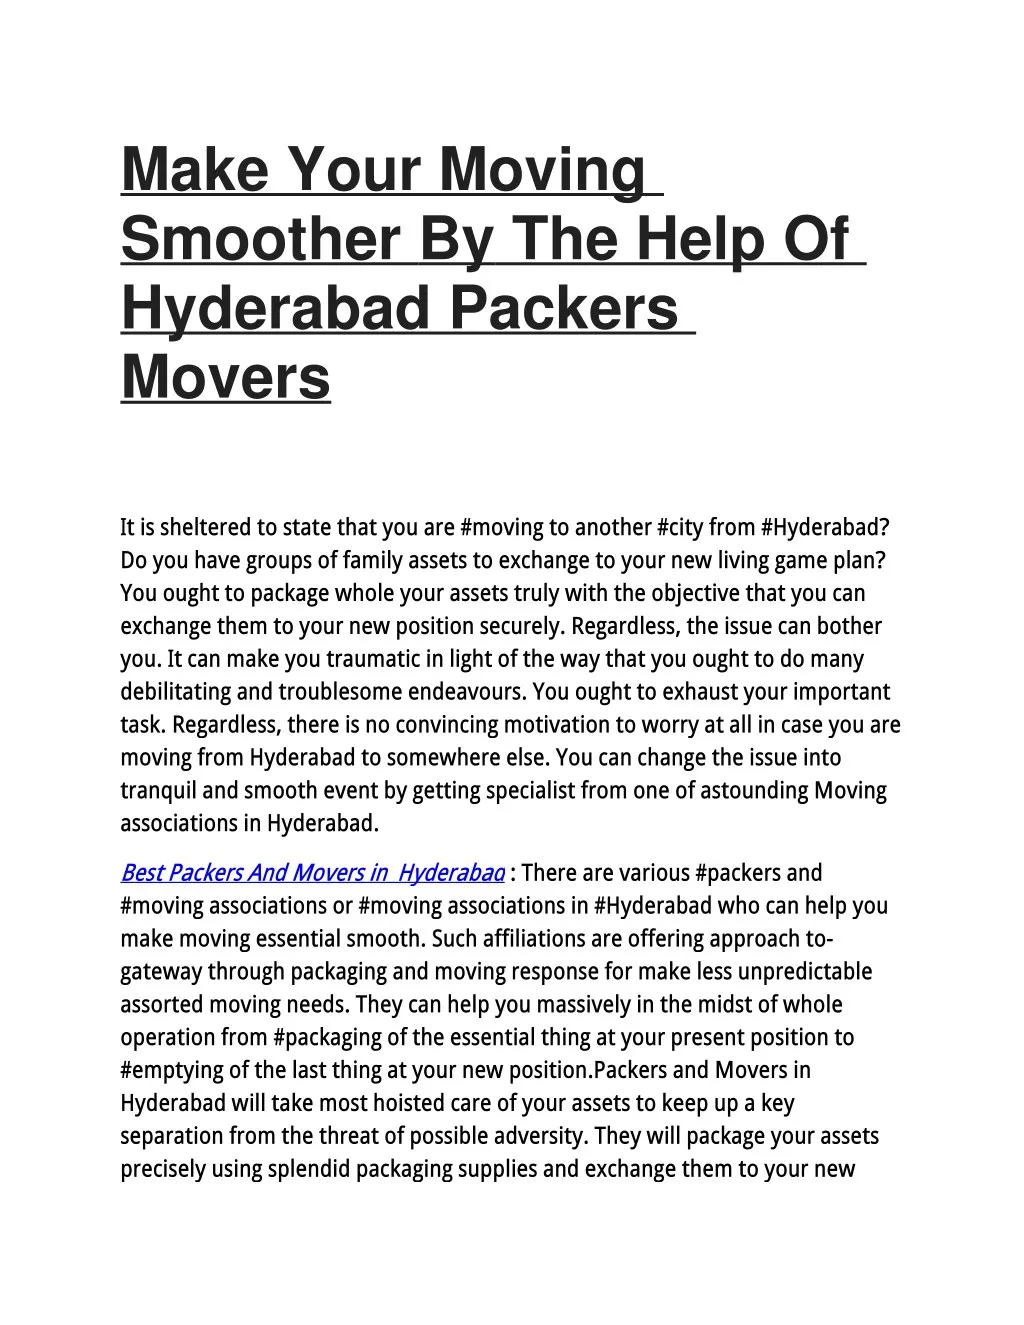 make your moving smoother by the help